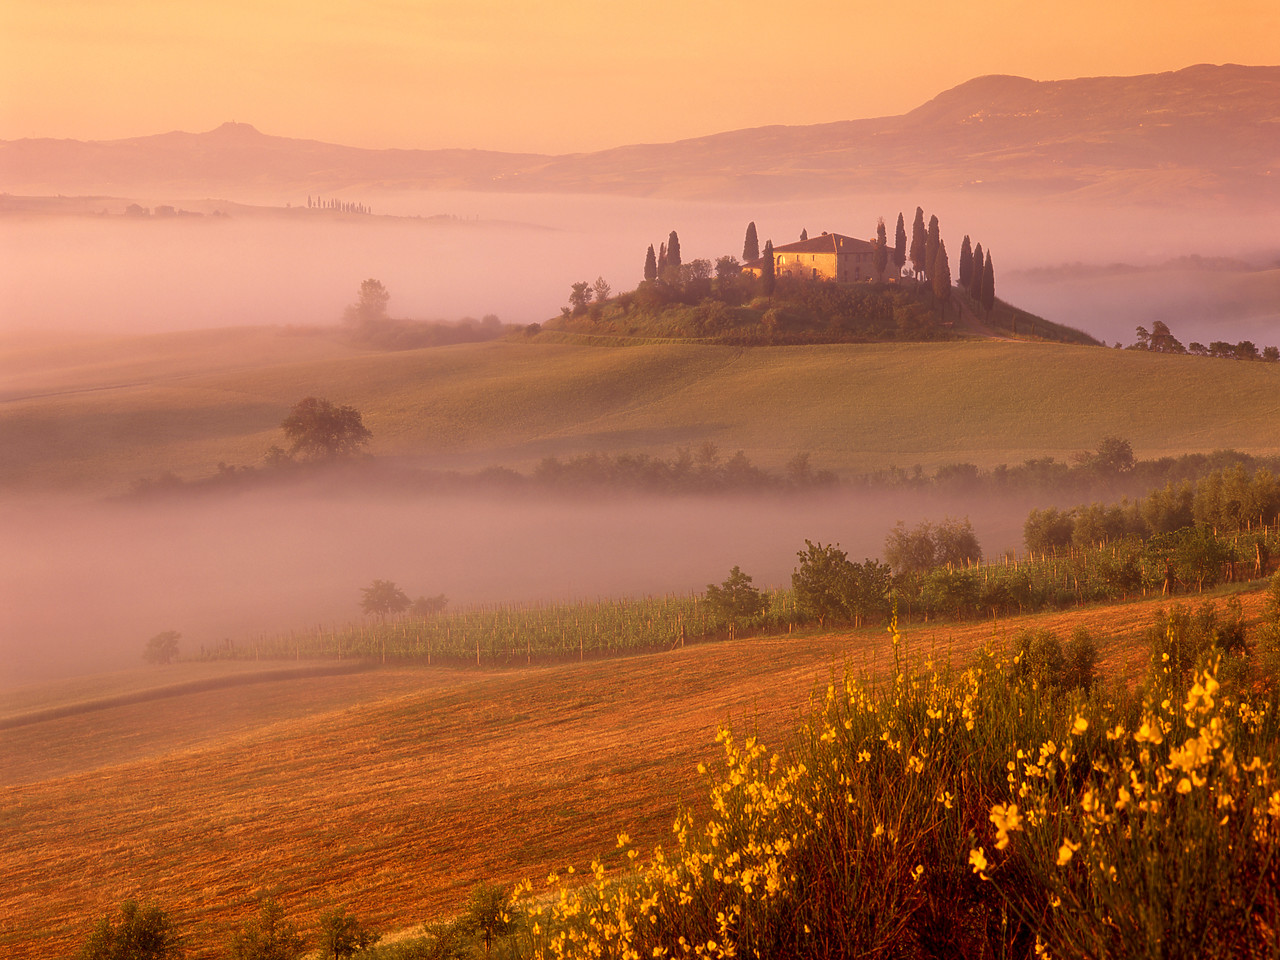 #020133-1 - Belvedere in Mist, San Quirico d'Orcia, Tuscany, Italy